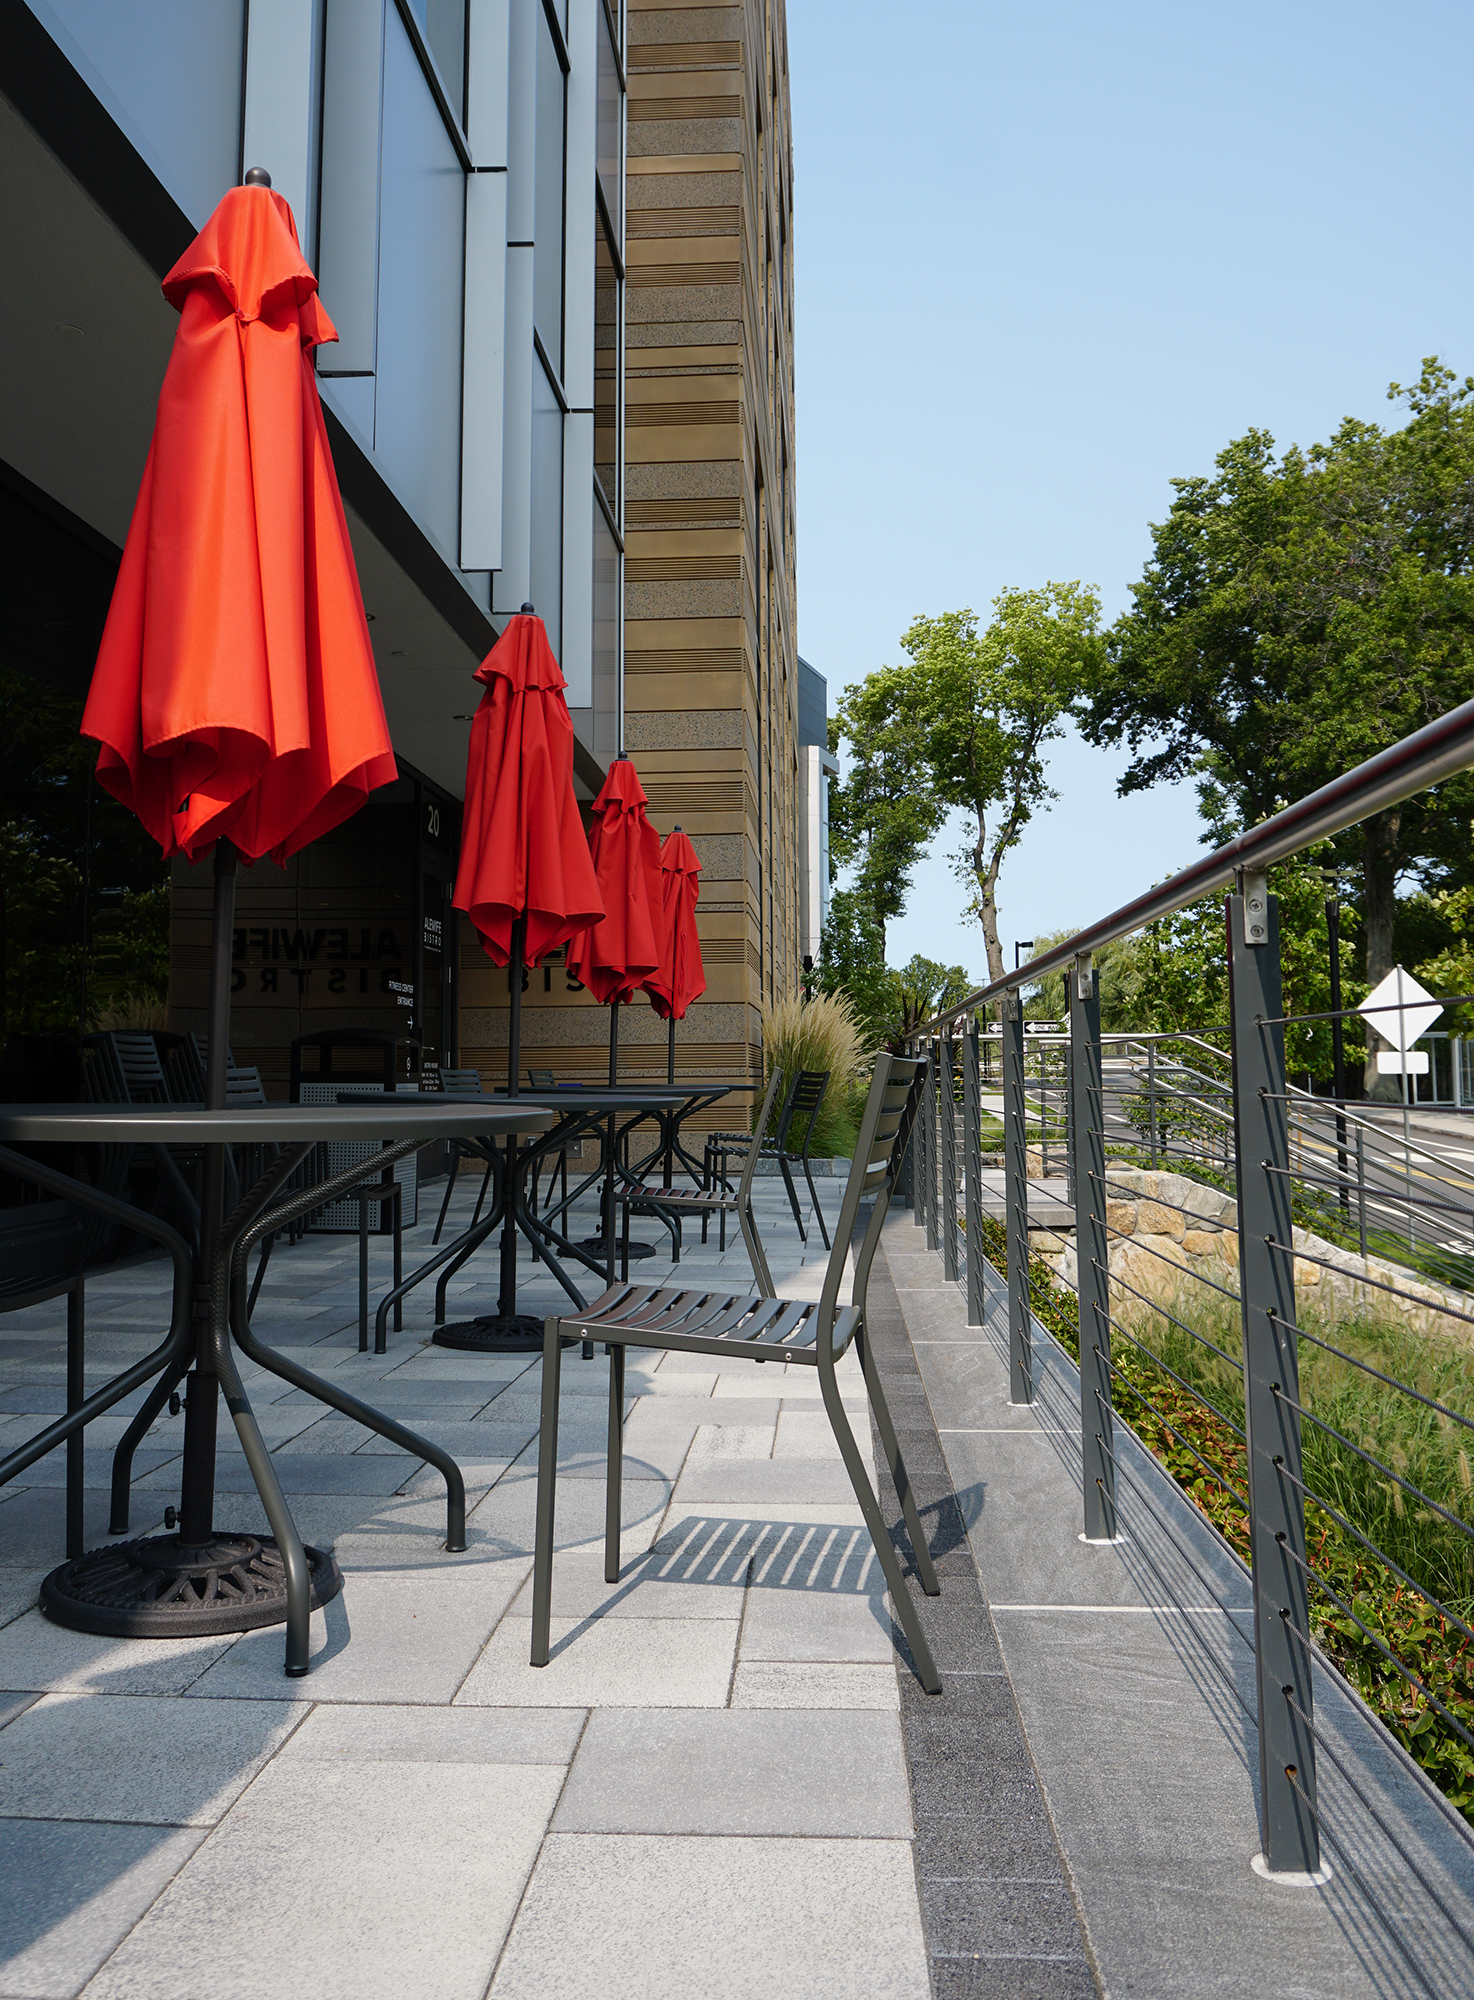 White Umbriano paver patio is enclosed by a wire railing, with an outdoor table and chairs and red umbrellas adorning the space.